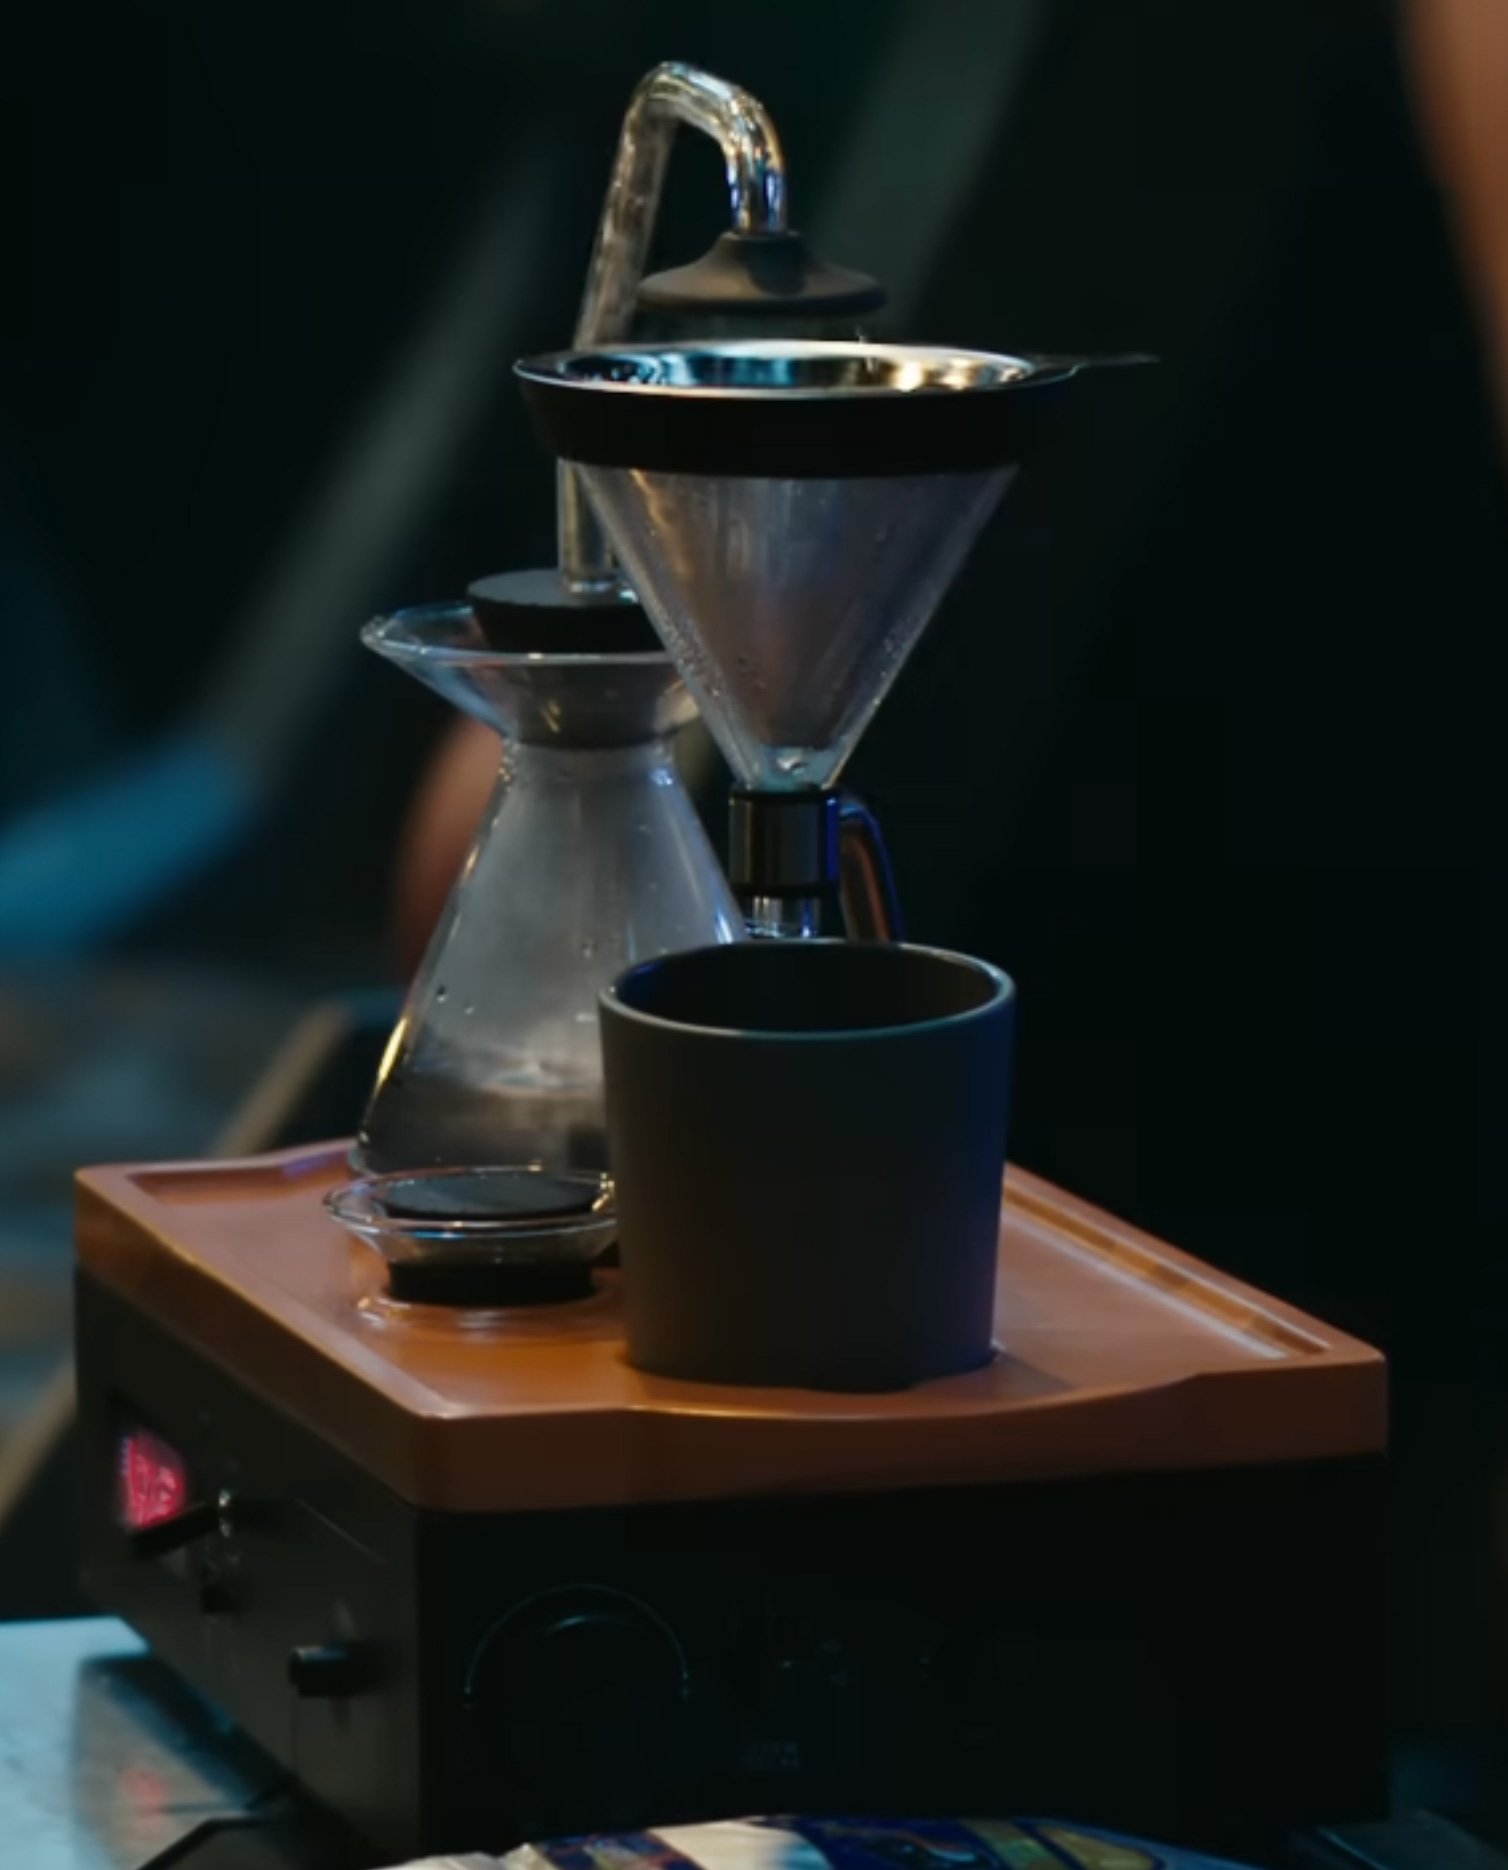 Bariseur Coffee Maker in The Marvels movie - Brie Larson